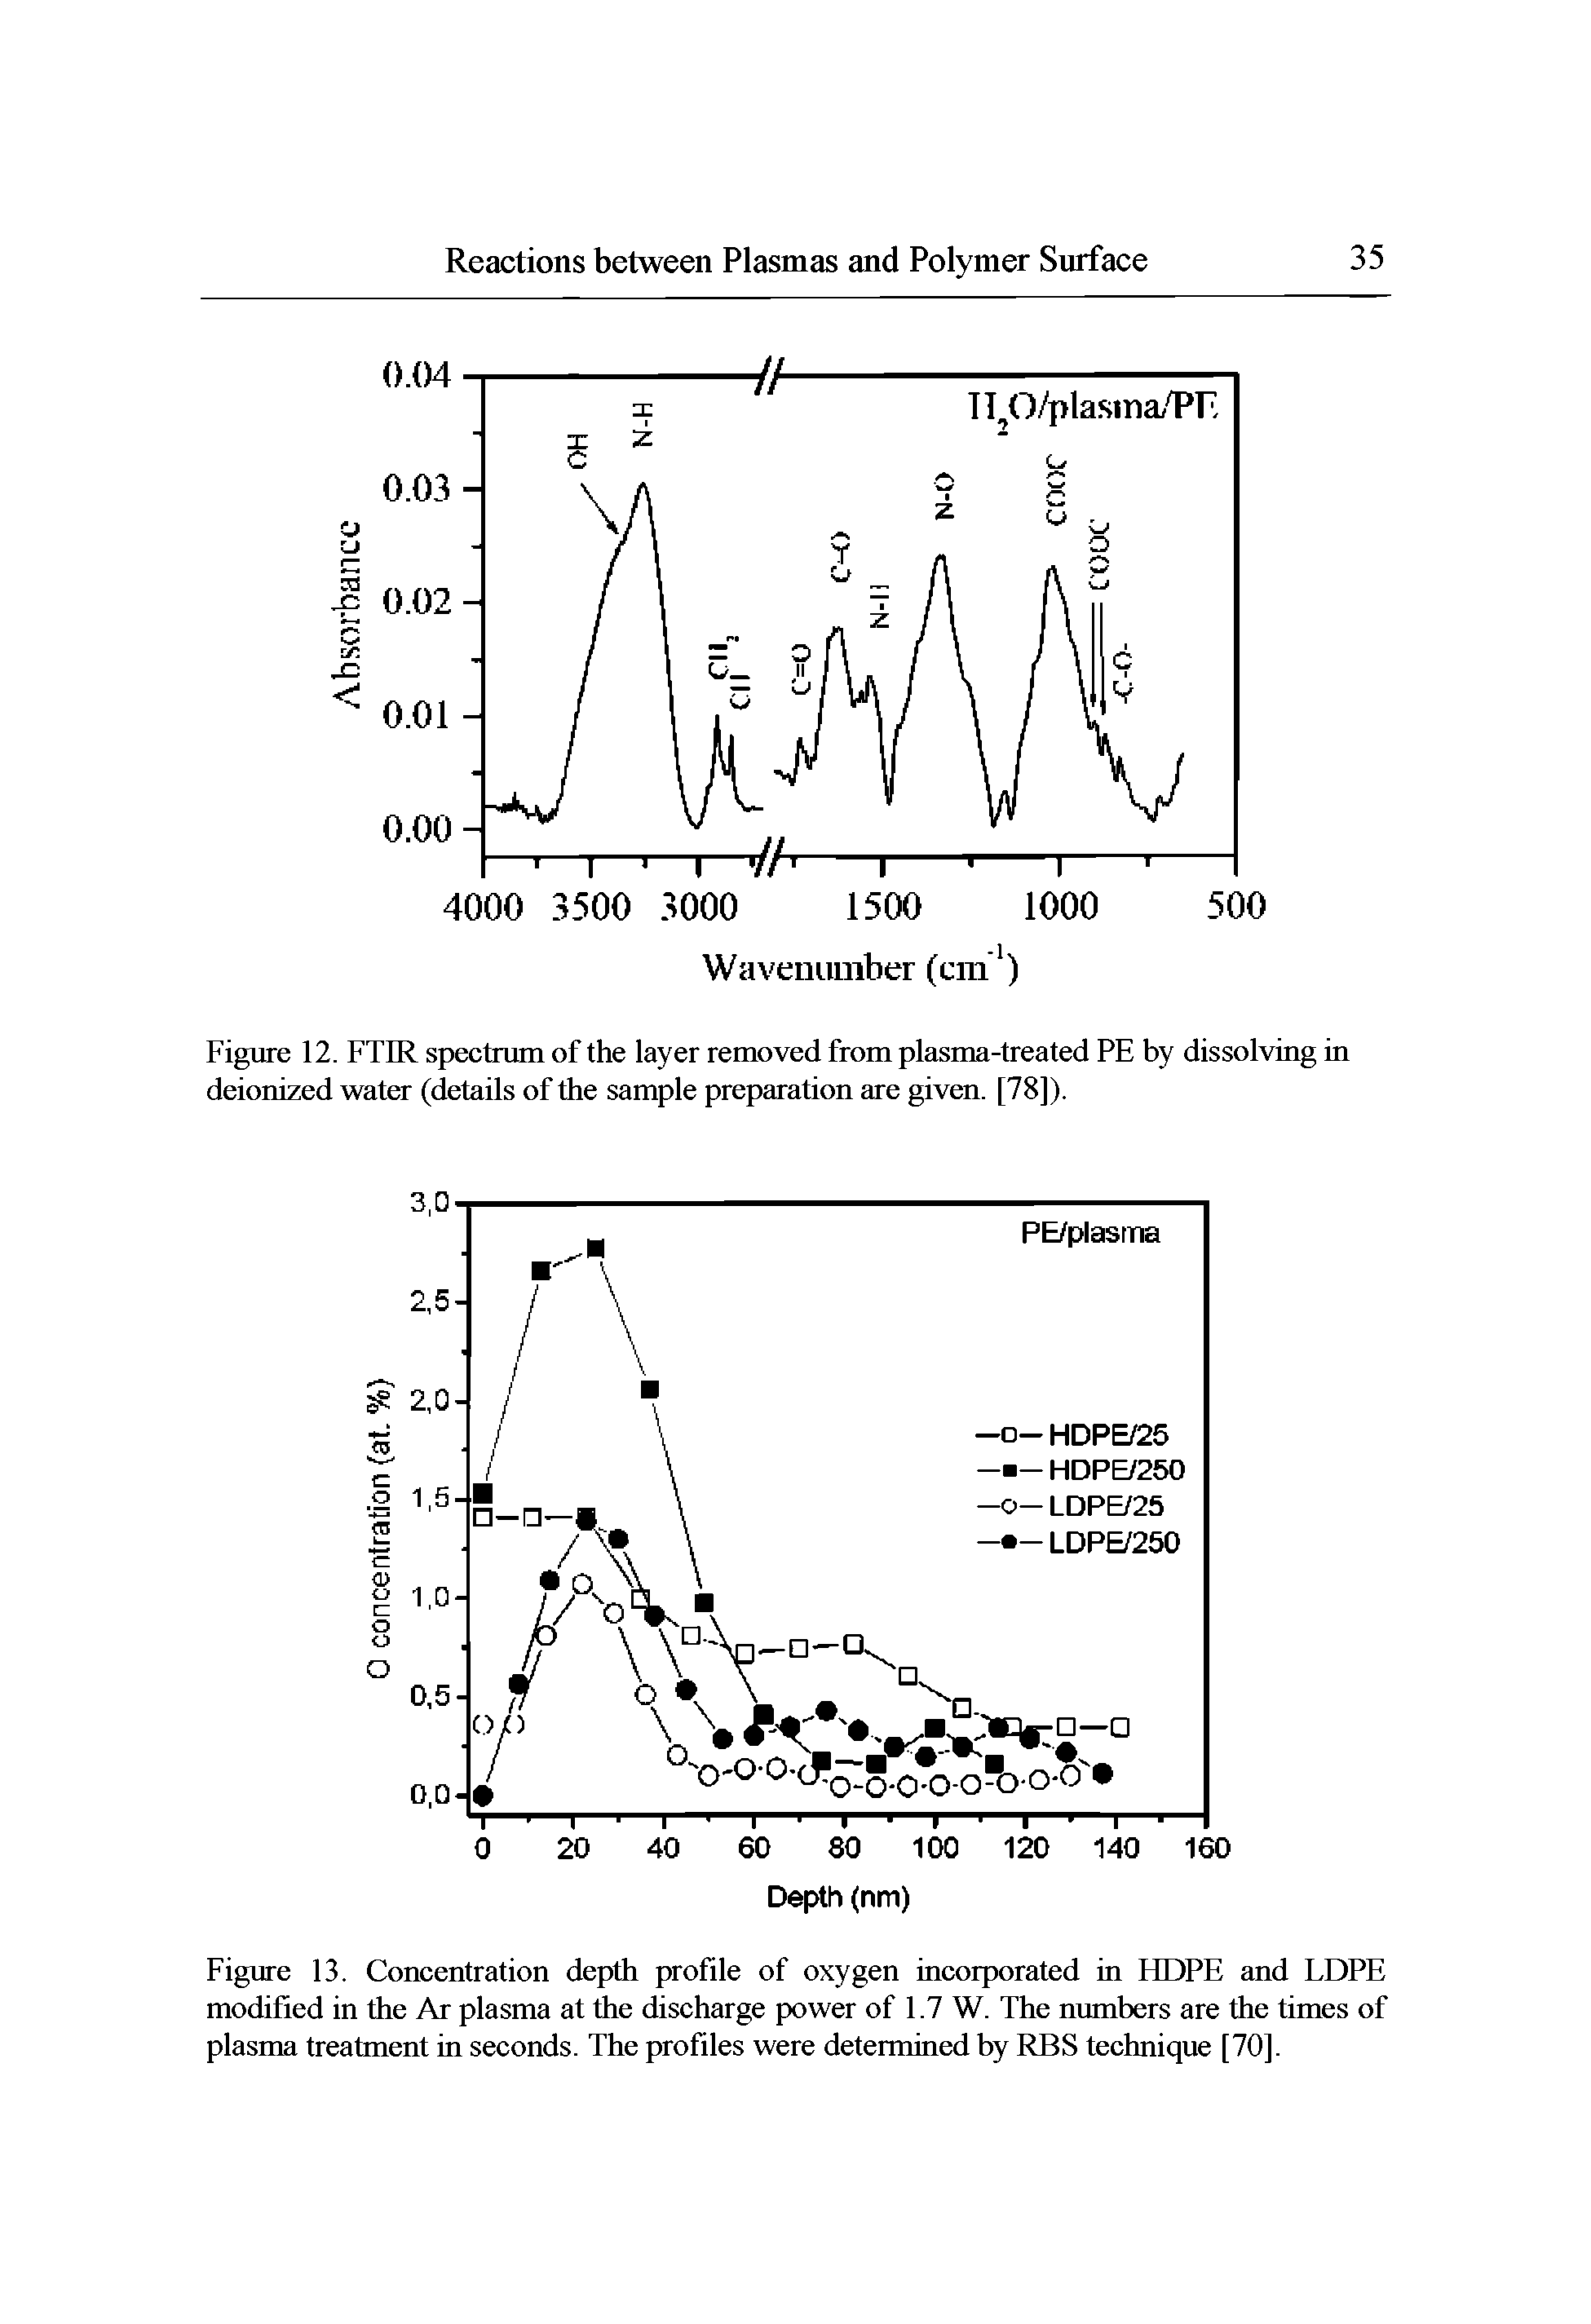 Figure 12. FTIR spectrum of the layer removed from plasma-treated PE by dissolving in deionized water (details of the sample preparation are given. [78]).